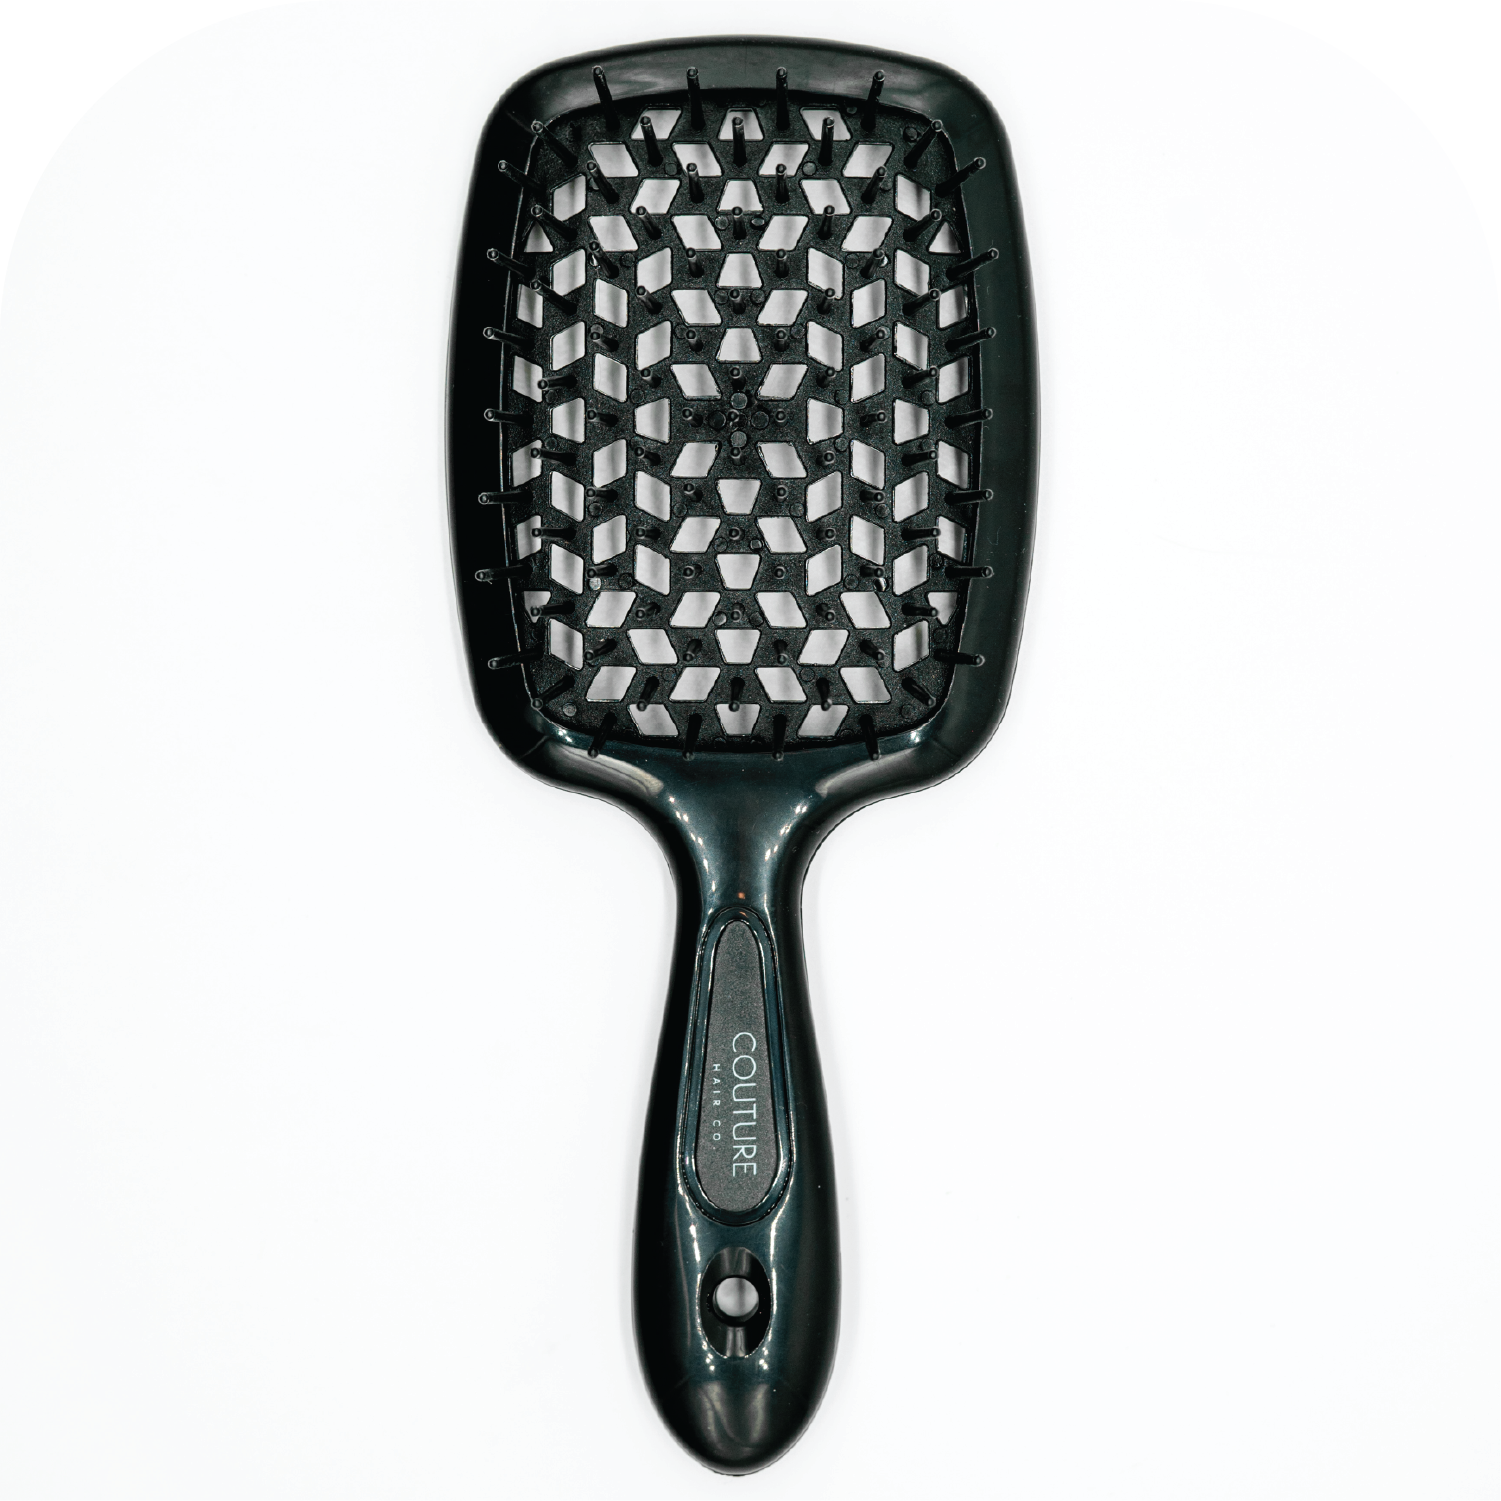 Couture Hair Co. Wet/Dry Detangling Brush like the UNbrush in the color black